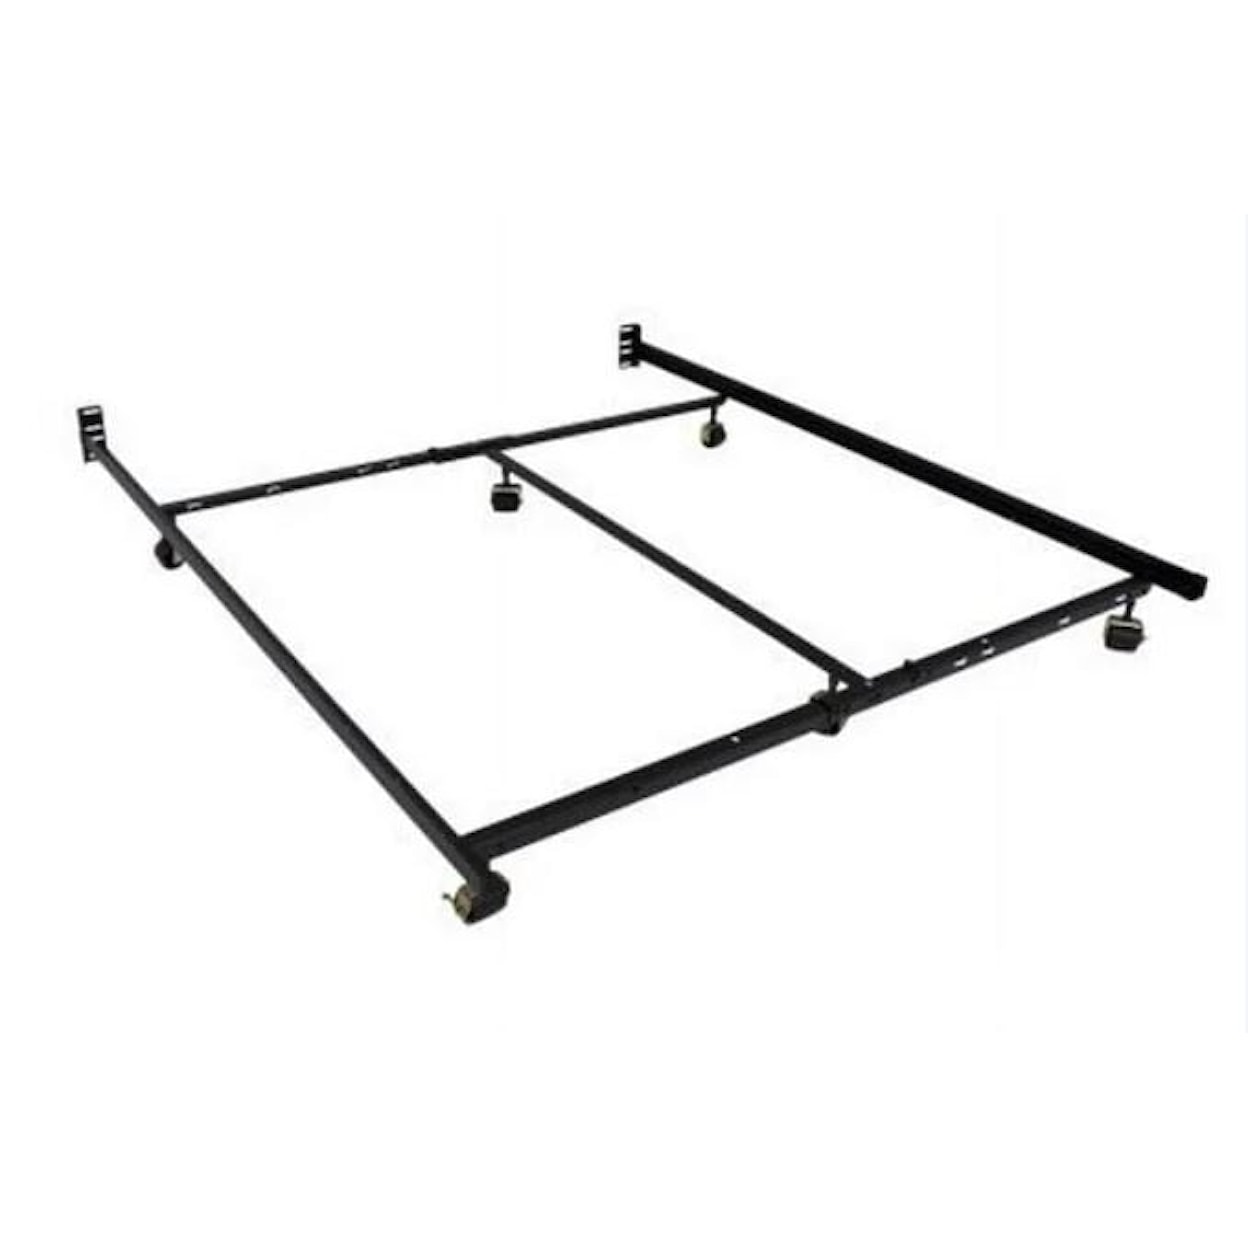 Hollywood Bed Frame Company Lo-Pro Universal Low Profile Bed Frame